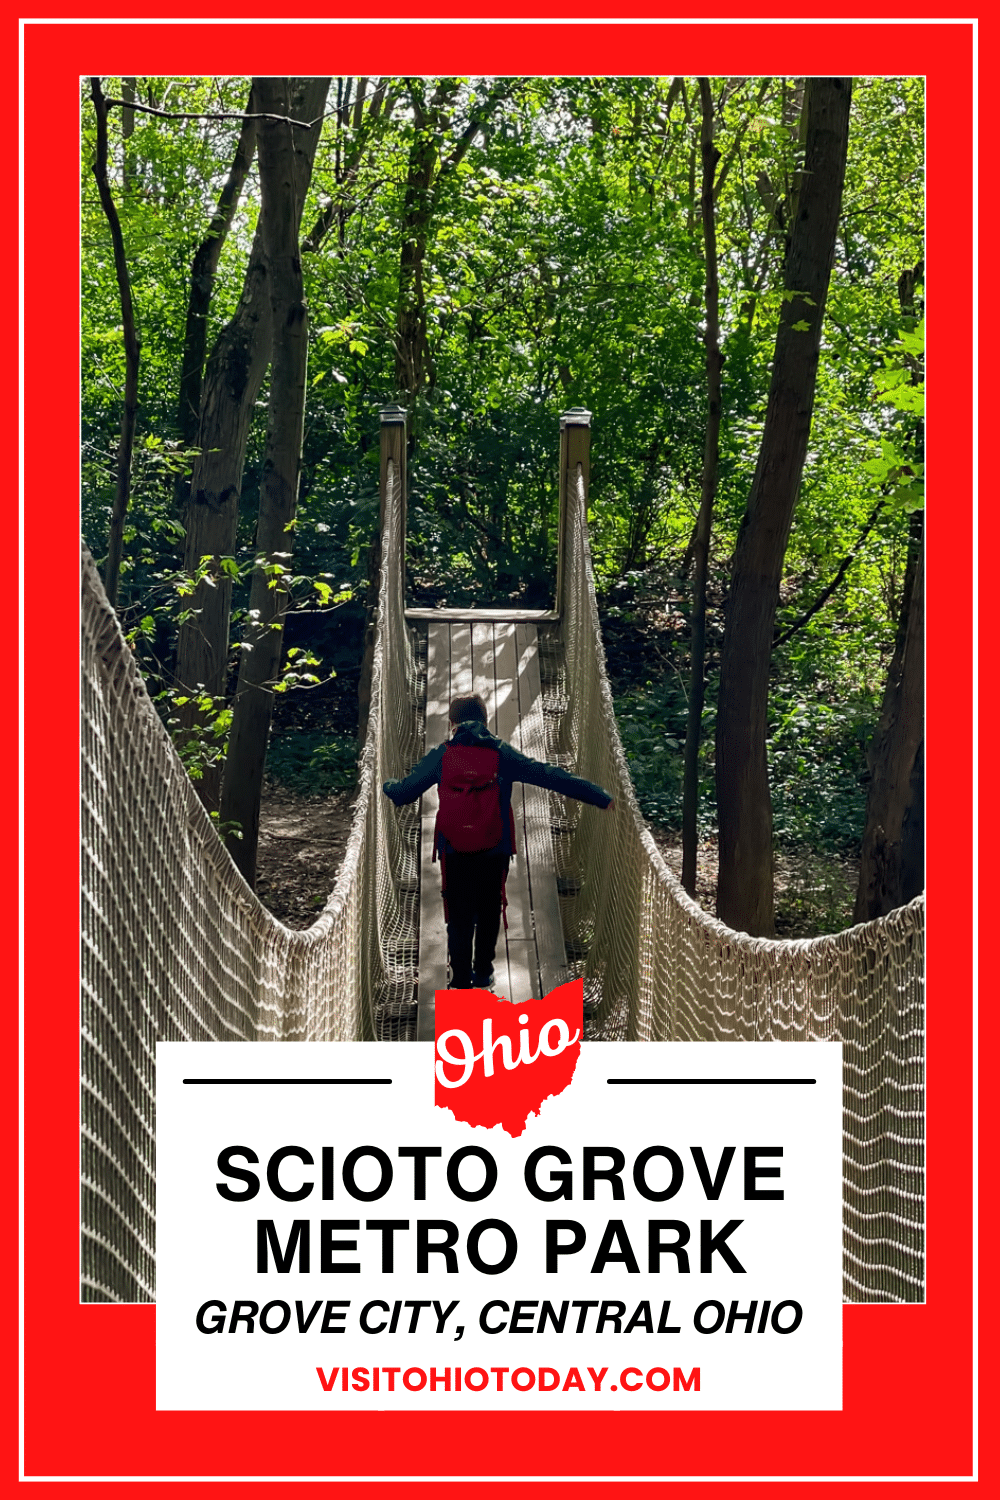 Explore the scenic wonders of Scioto Grove Metro Park in Grove City, Ohio. Immerse yourself in nature's beauty with miles of trails for hiking and biking. Discover tranquil riverside spots perfect for picnics or fishing. Capture unforgettable moments amidst lush forests and sprawling meadows. Plan your adventure today at Scioto Grove Metro Park! #GroveCityOhio #OutdoorAdventure #NatureLovers